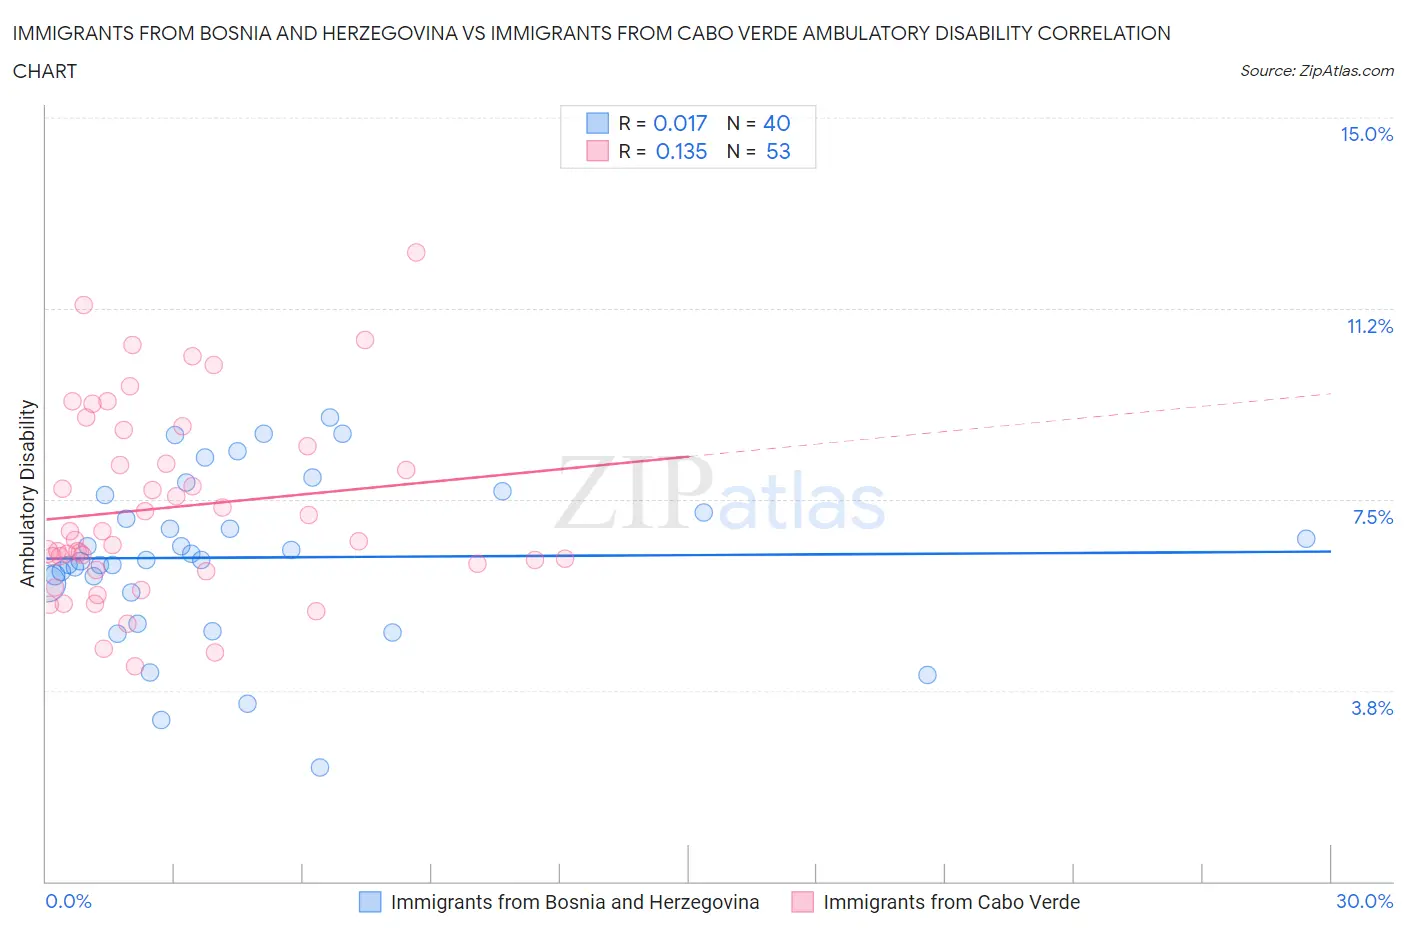 Immigrants from Bosnia and Herzegovina vs Immigrants from Cabo Verde Ambulatory Disability